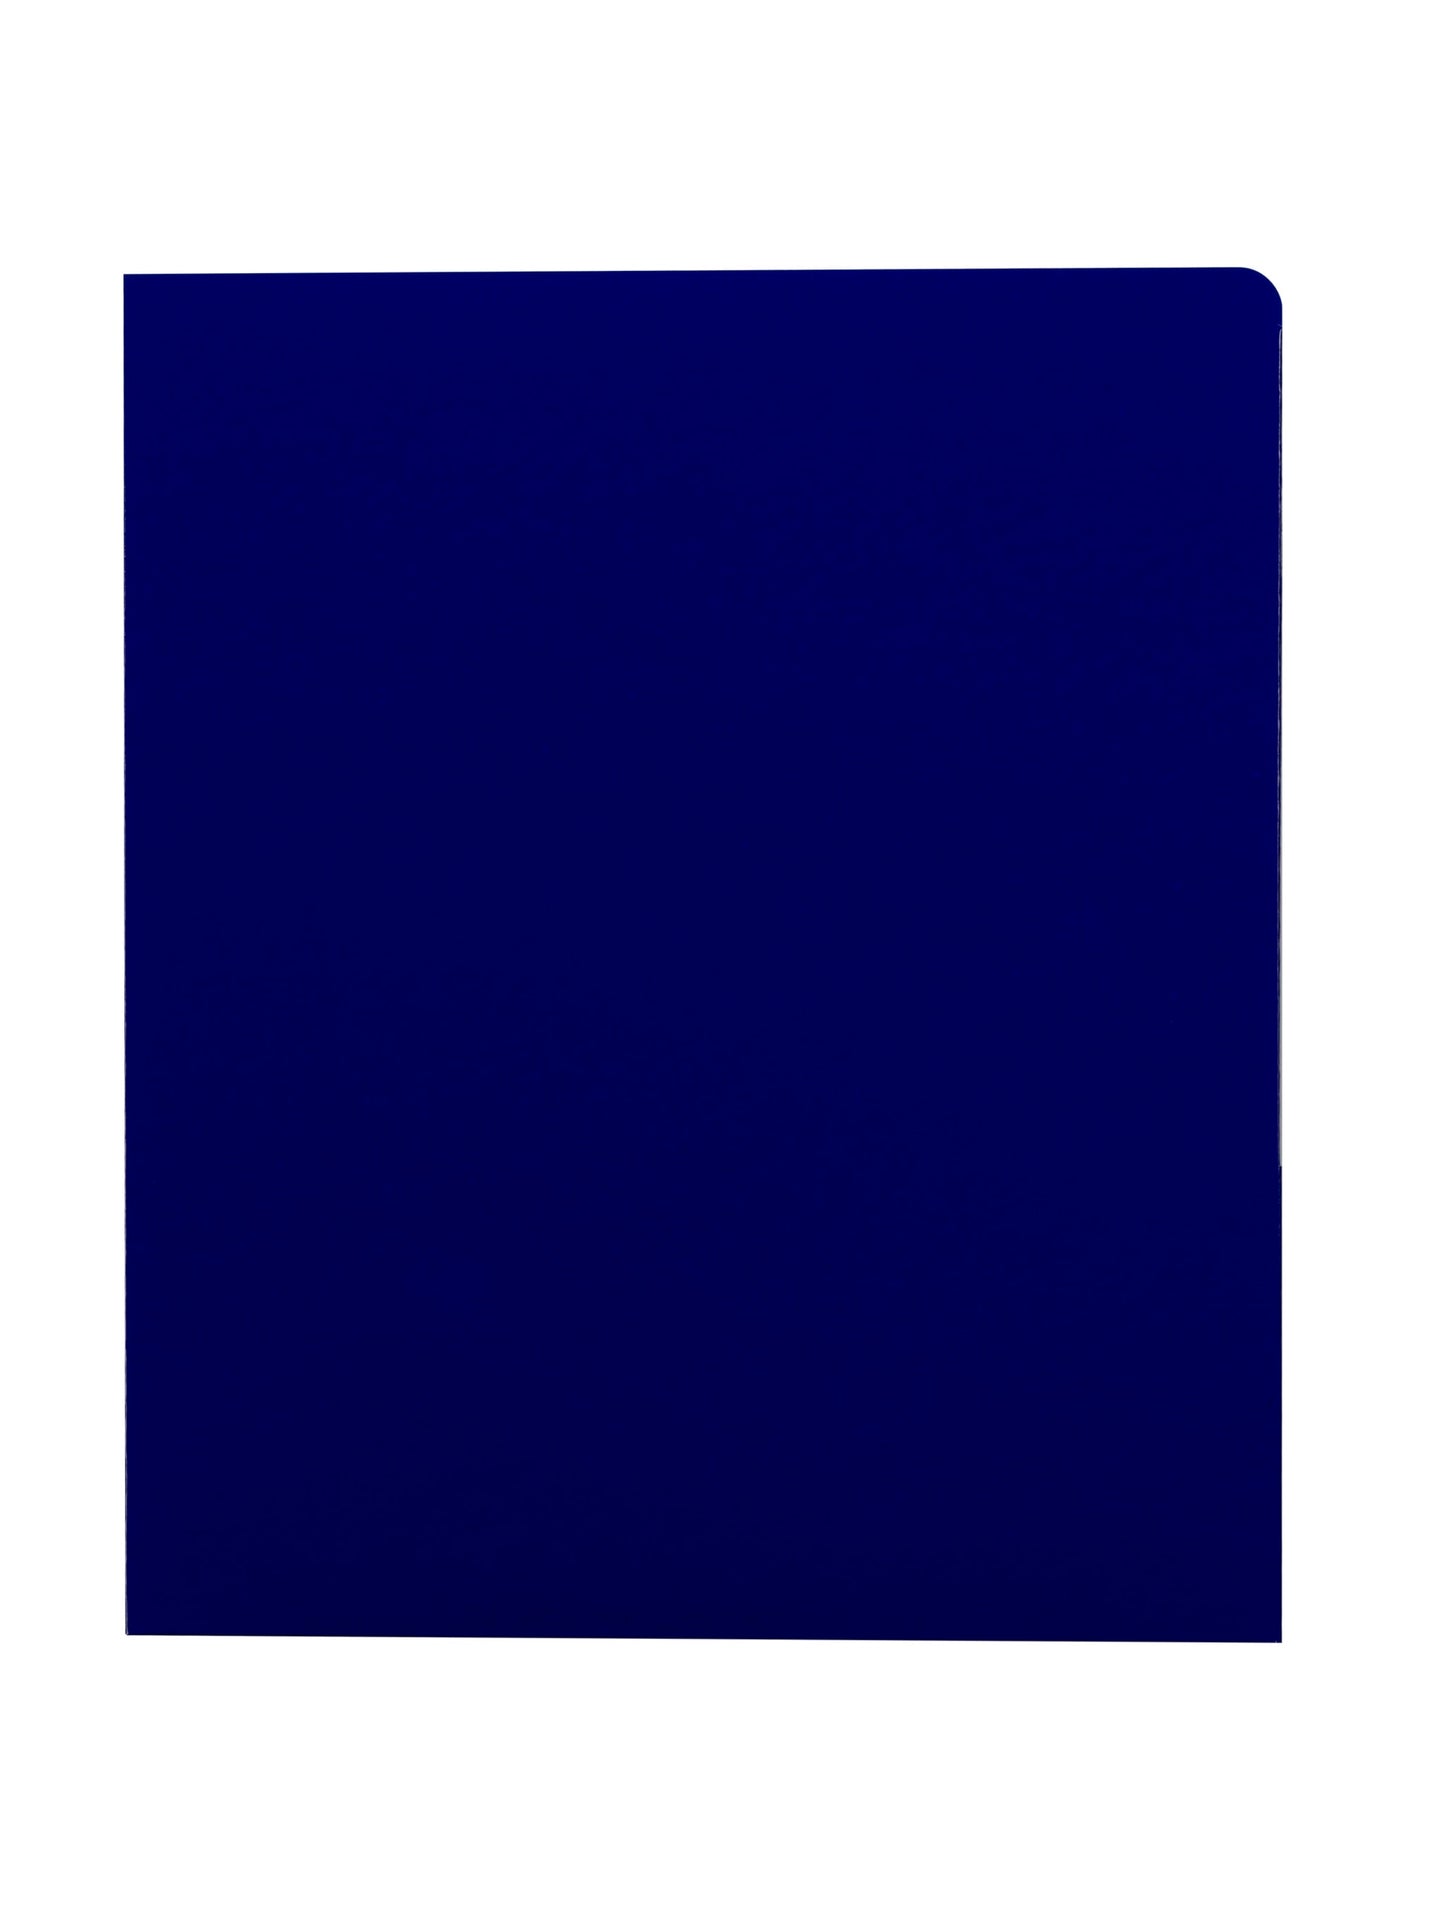 High Gloss Two-Pocket Folders, Navy Blue Color, Letter Size, 30086486878778